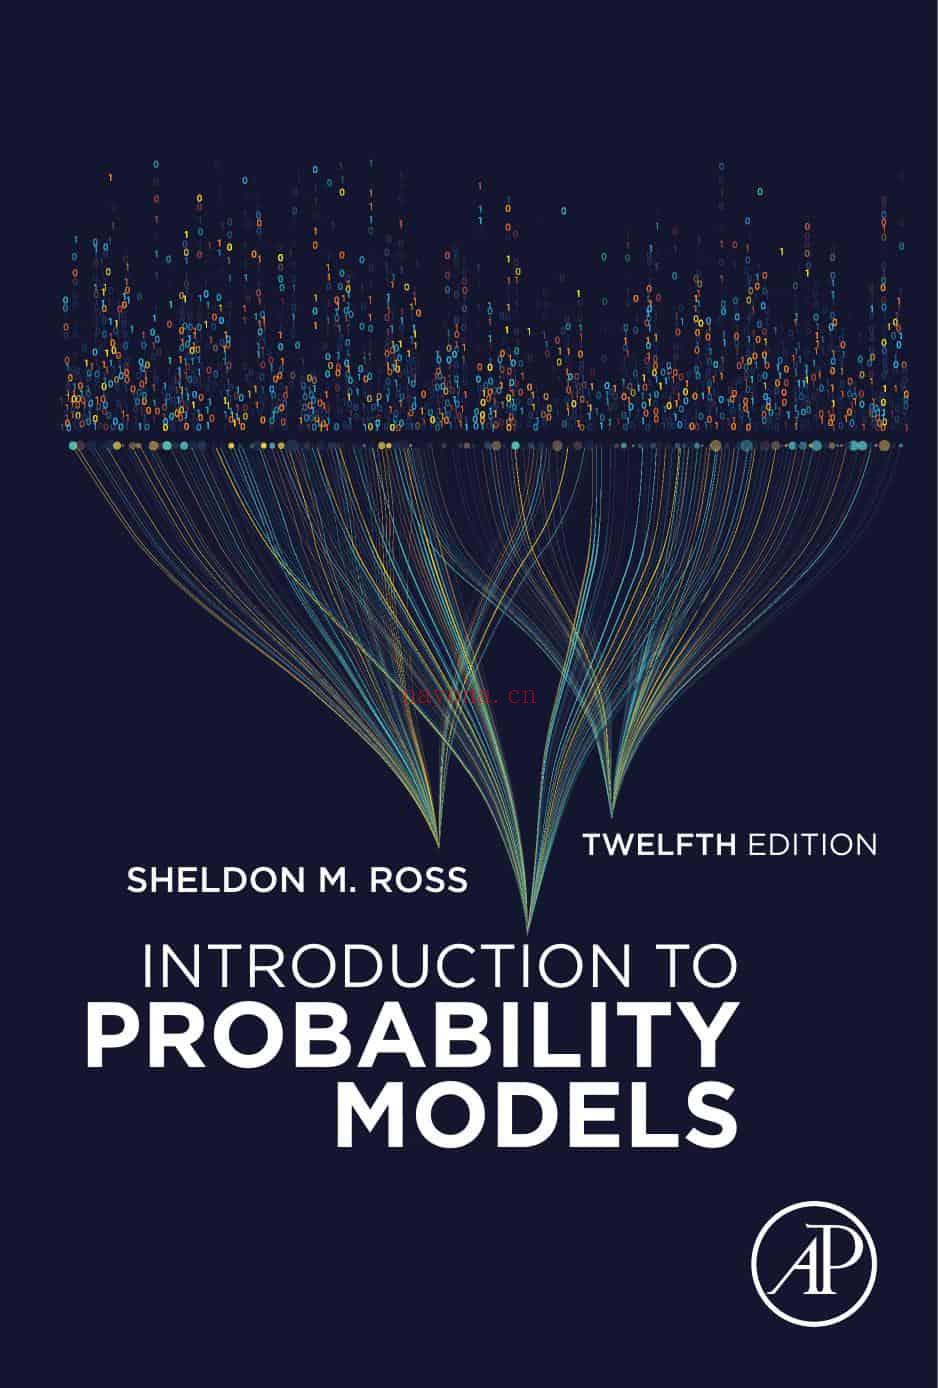 Introsrcction to Probability Models